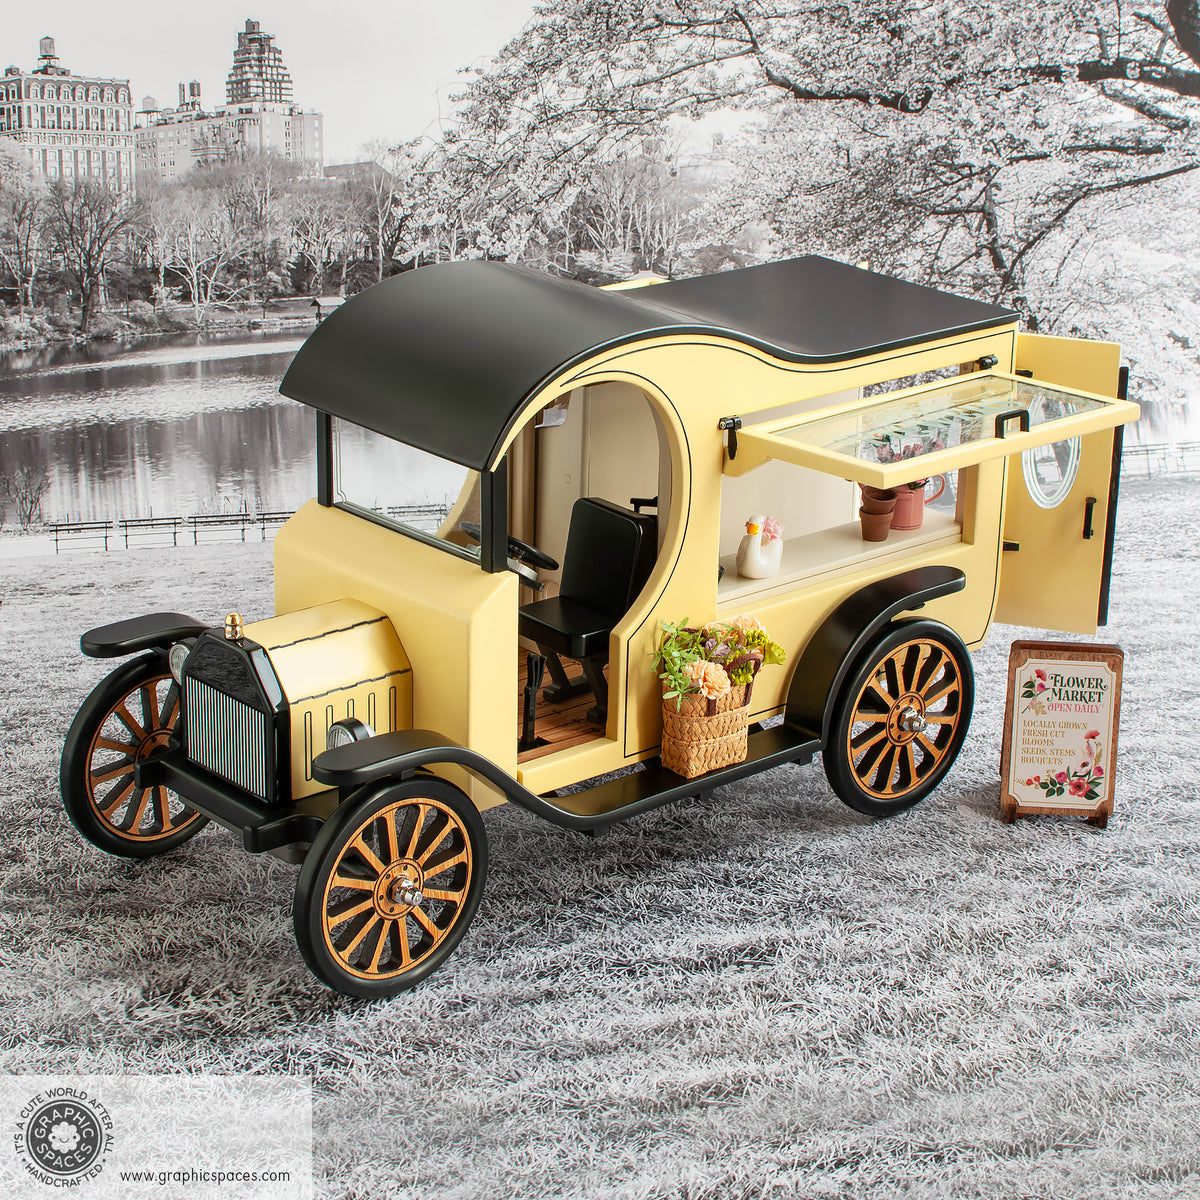 1:12 Scale Room Box Yellow Flower Shop Truck Model T C Cab. Driver side overhead angle view. Window and doors open.